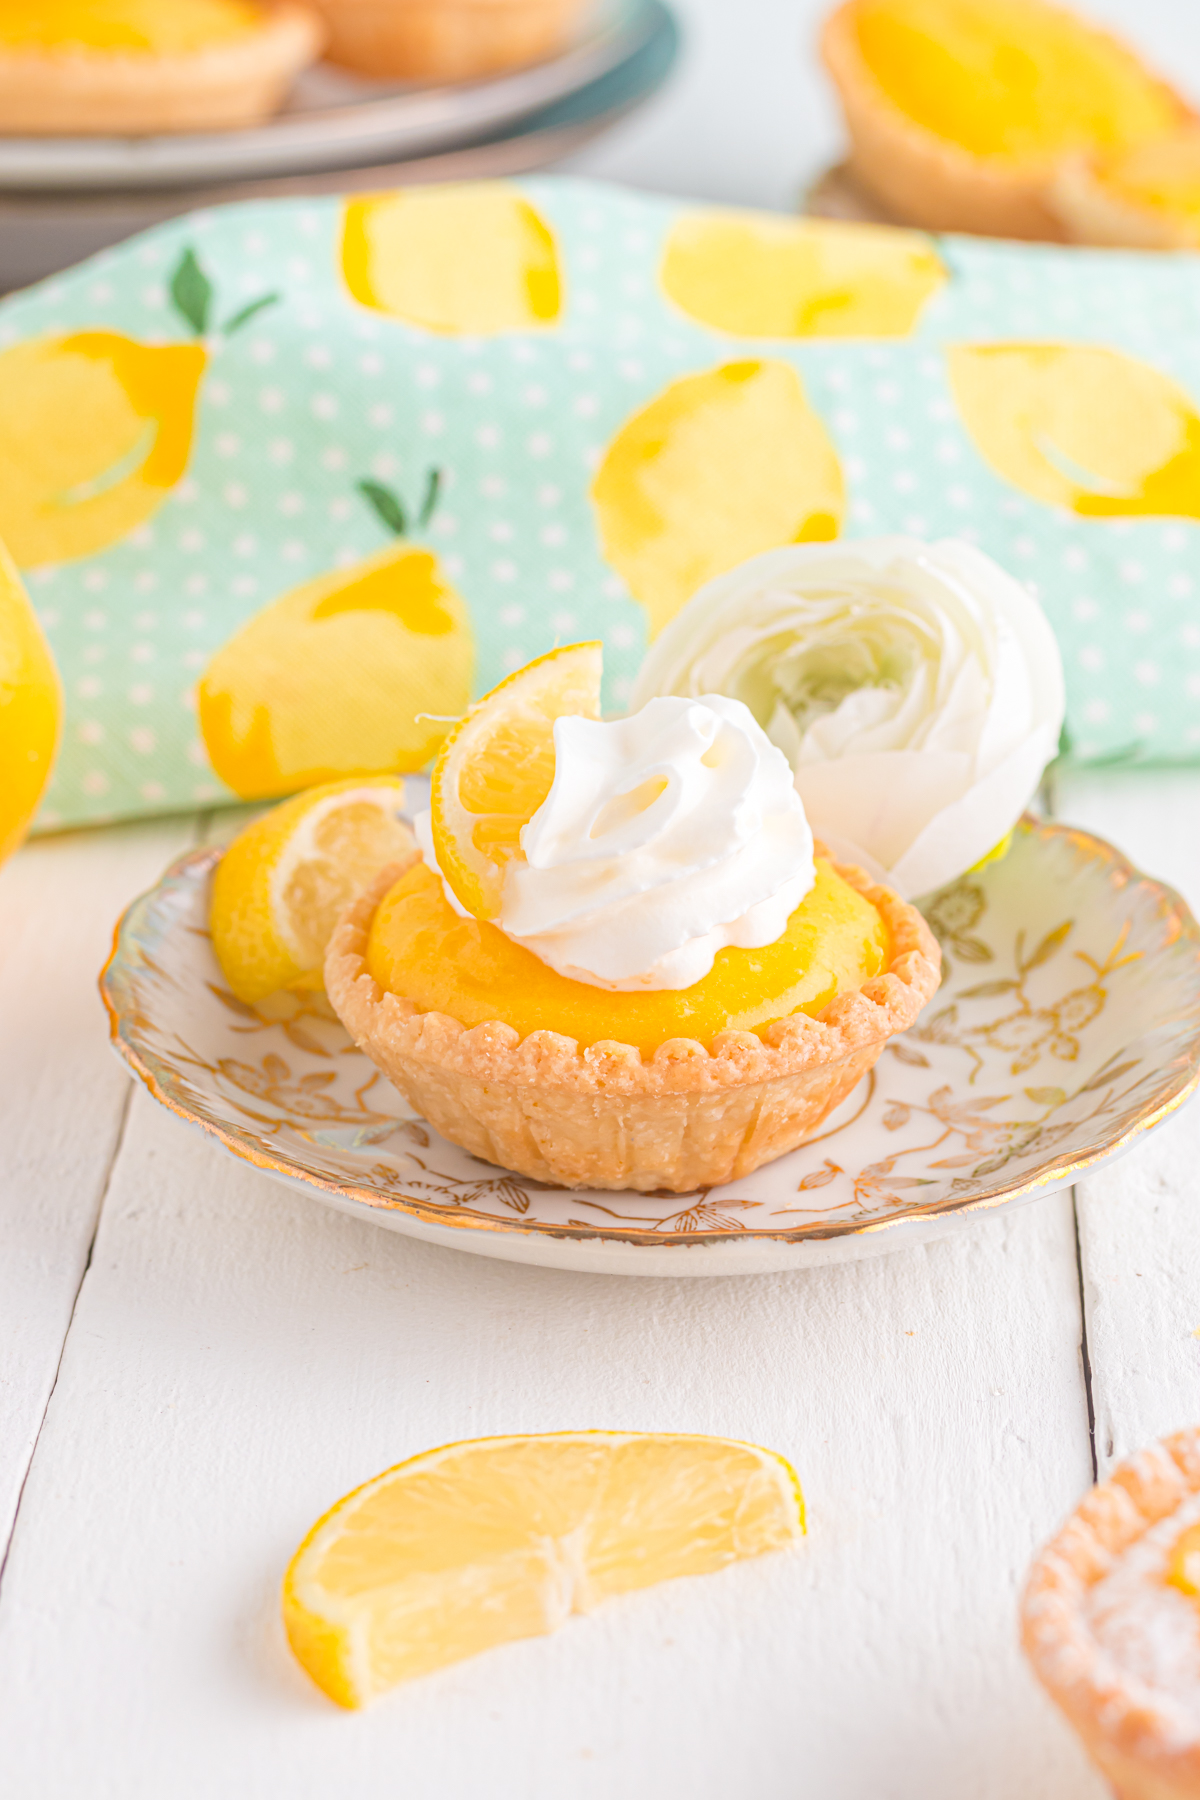 Mini lemon tarts on plate topped with whipped cream.